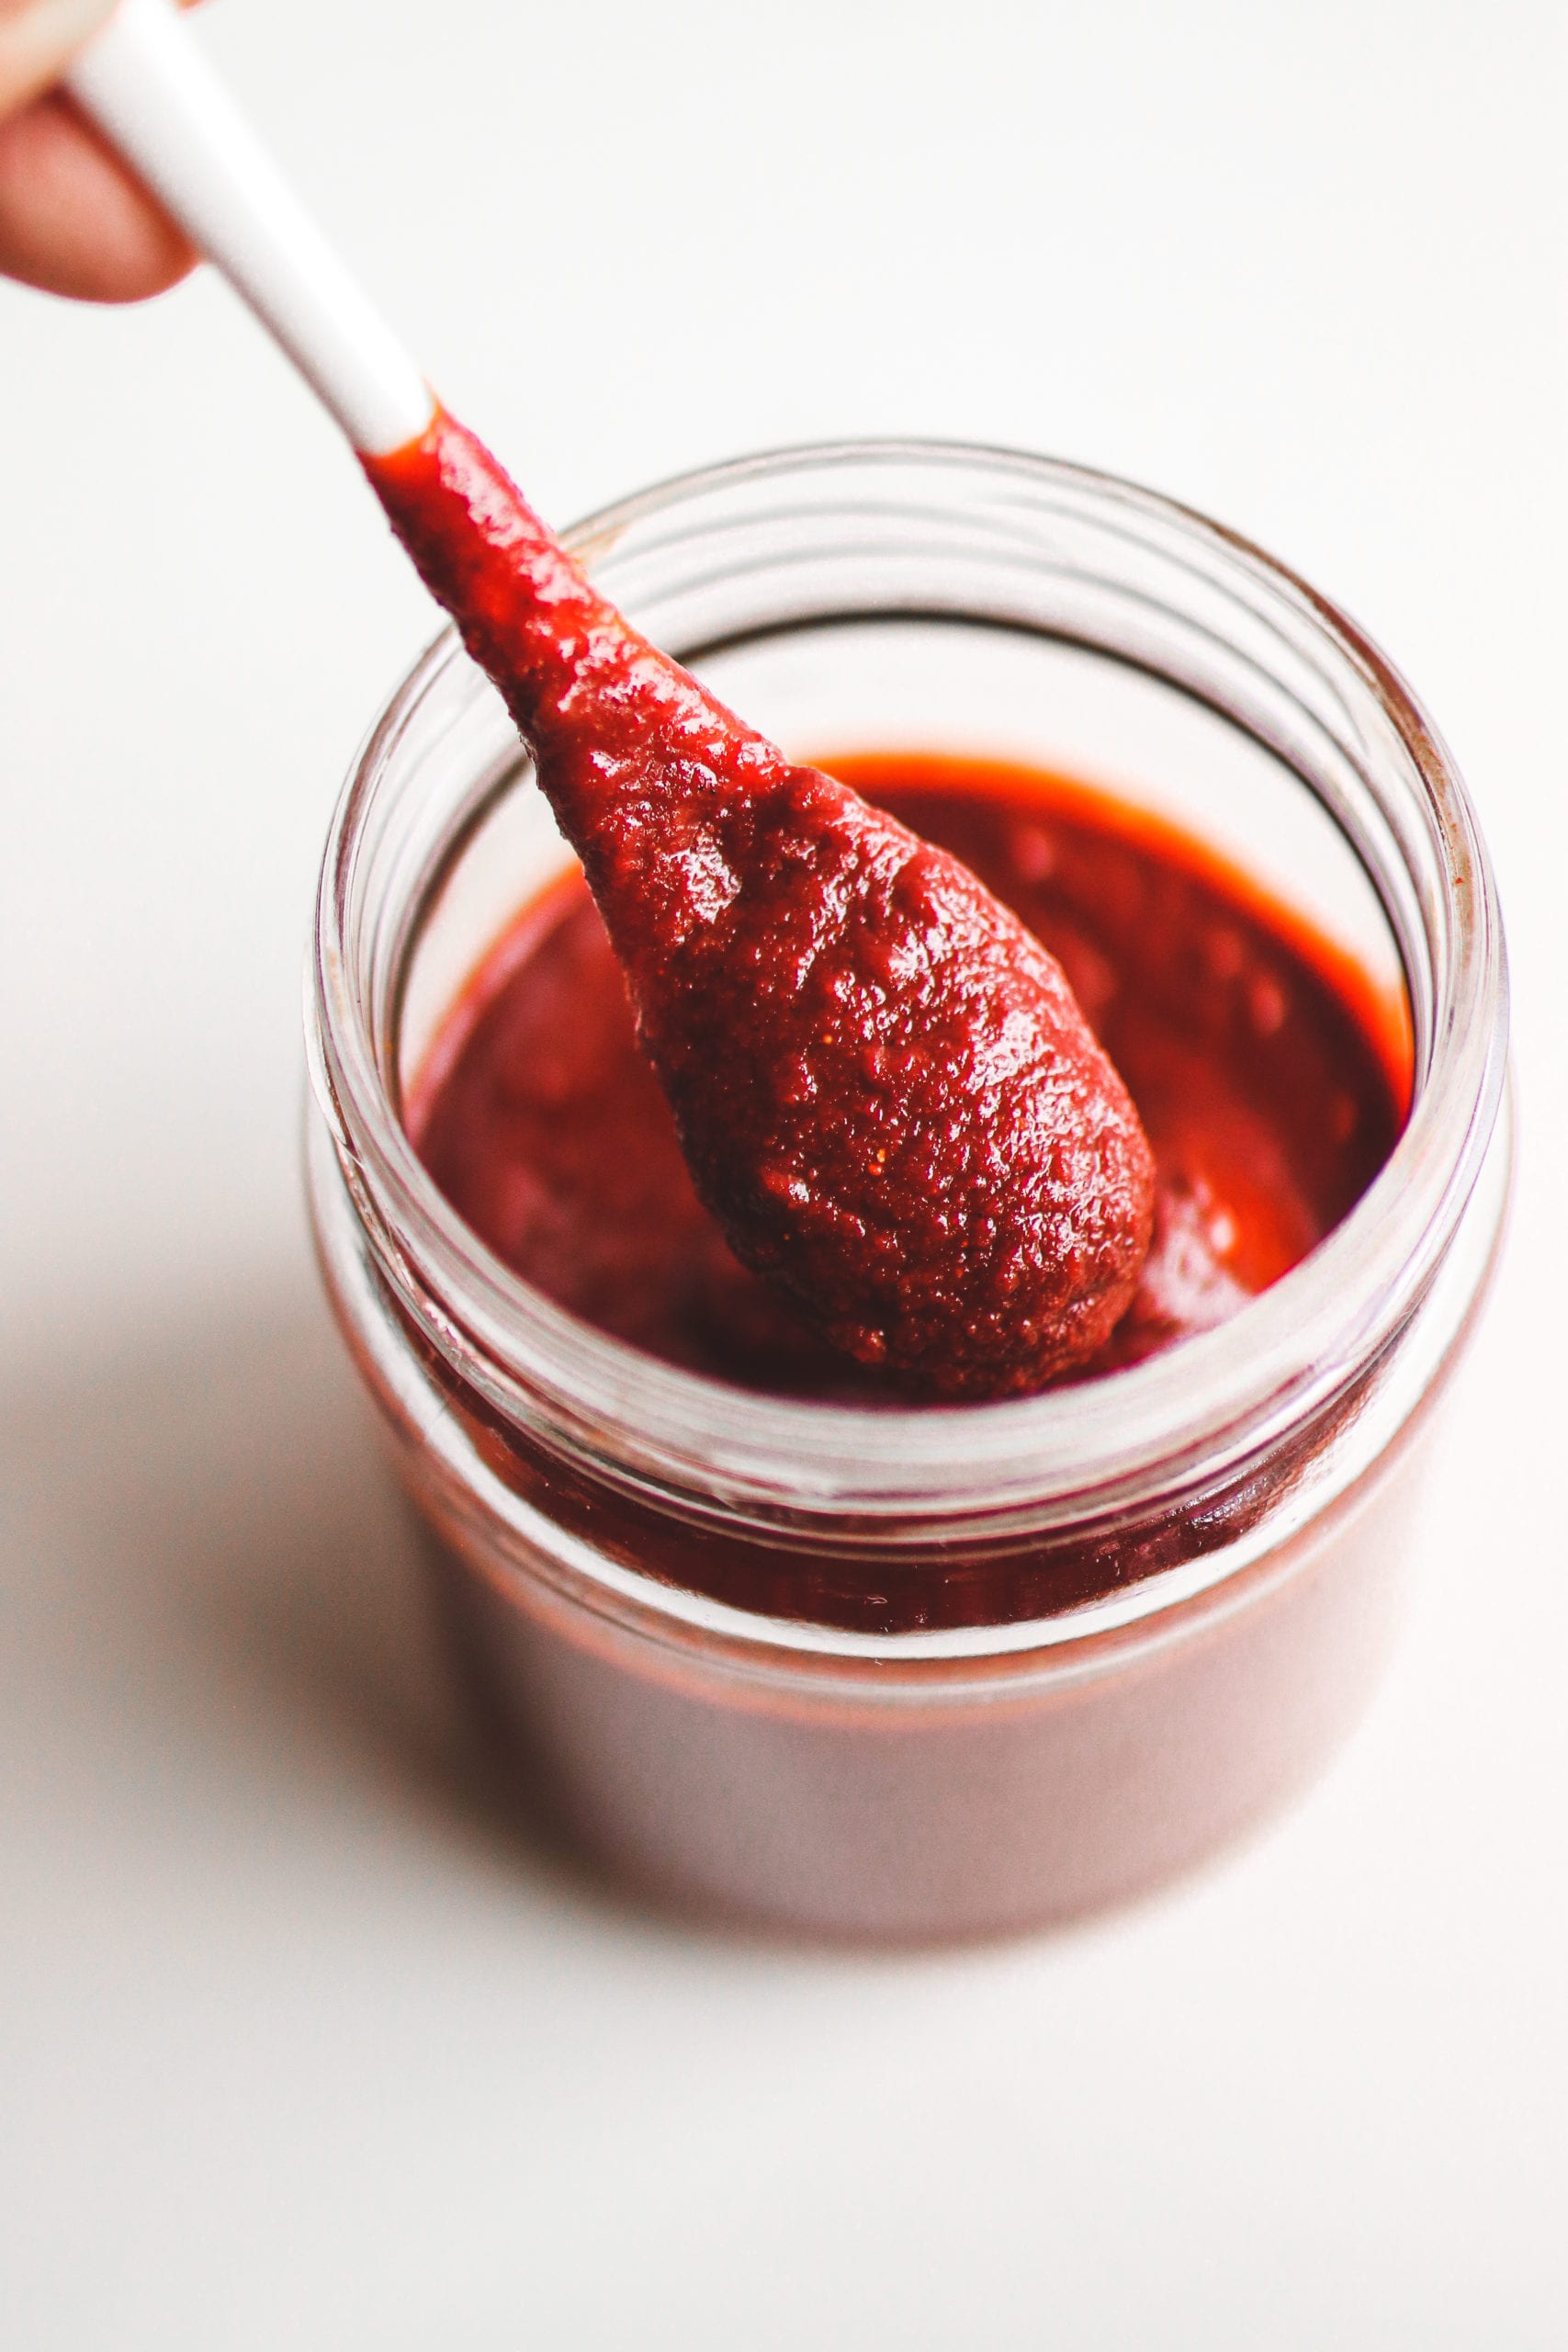 a closeup of a spoon holding red pepper sauce over a jar of sauce.